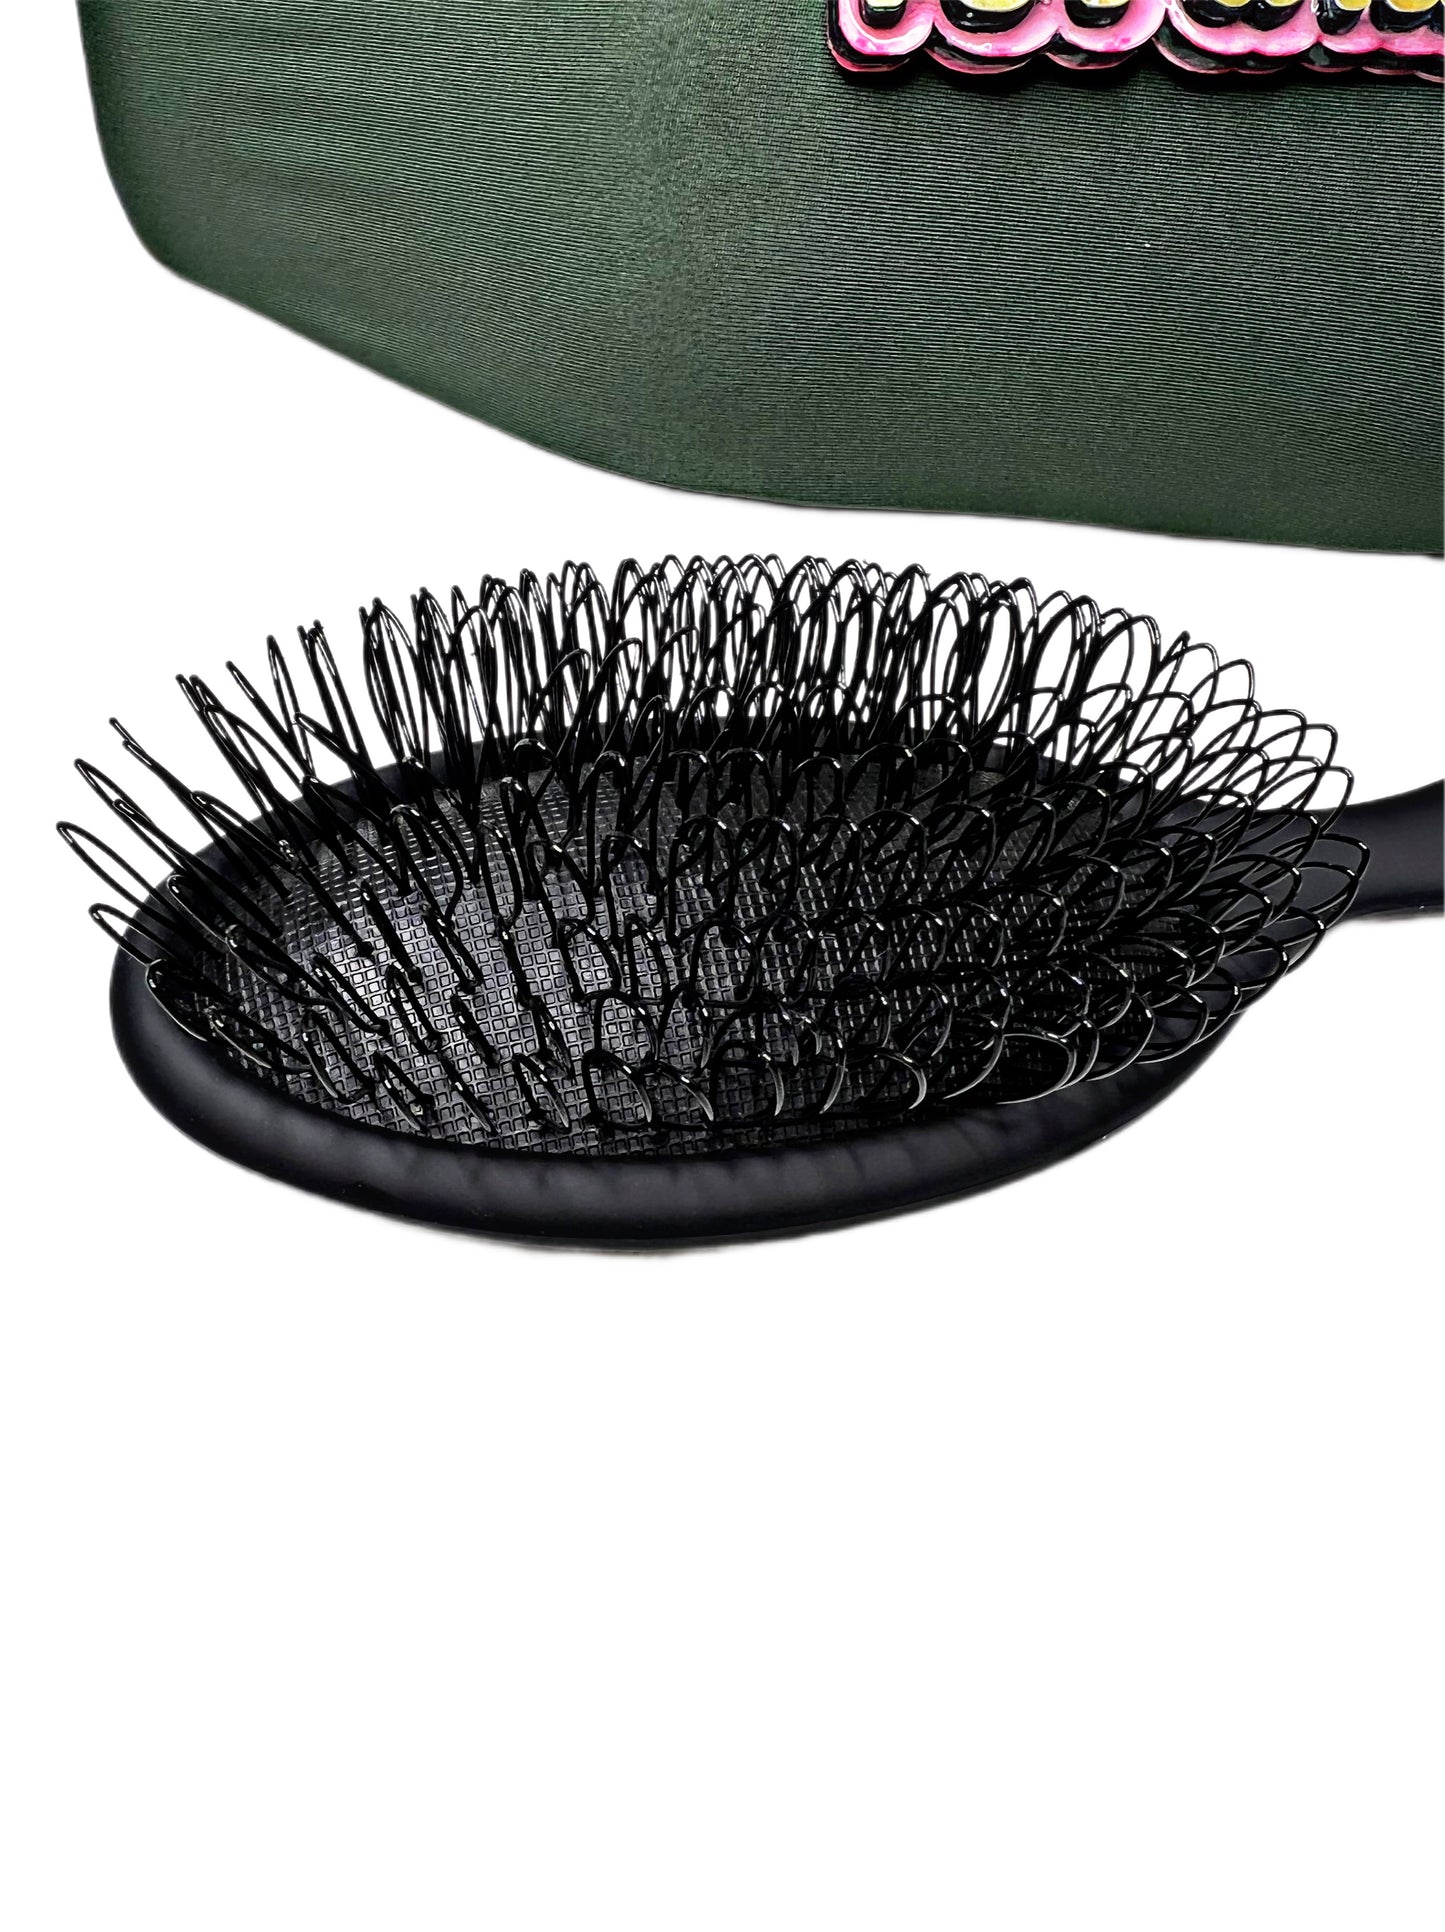 Loop Brush For Synthetic Wigs